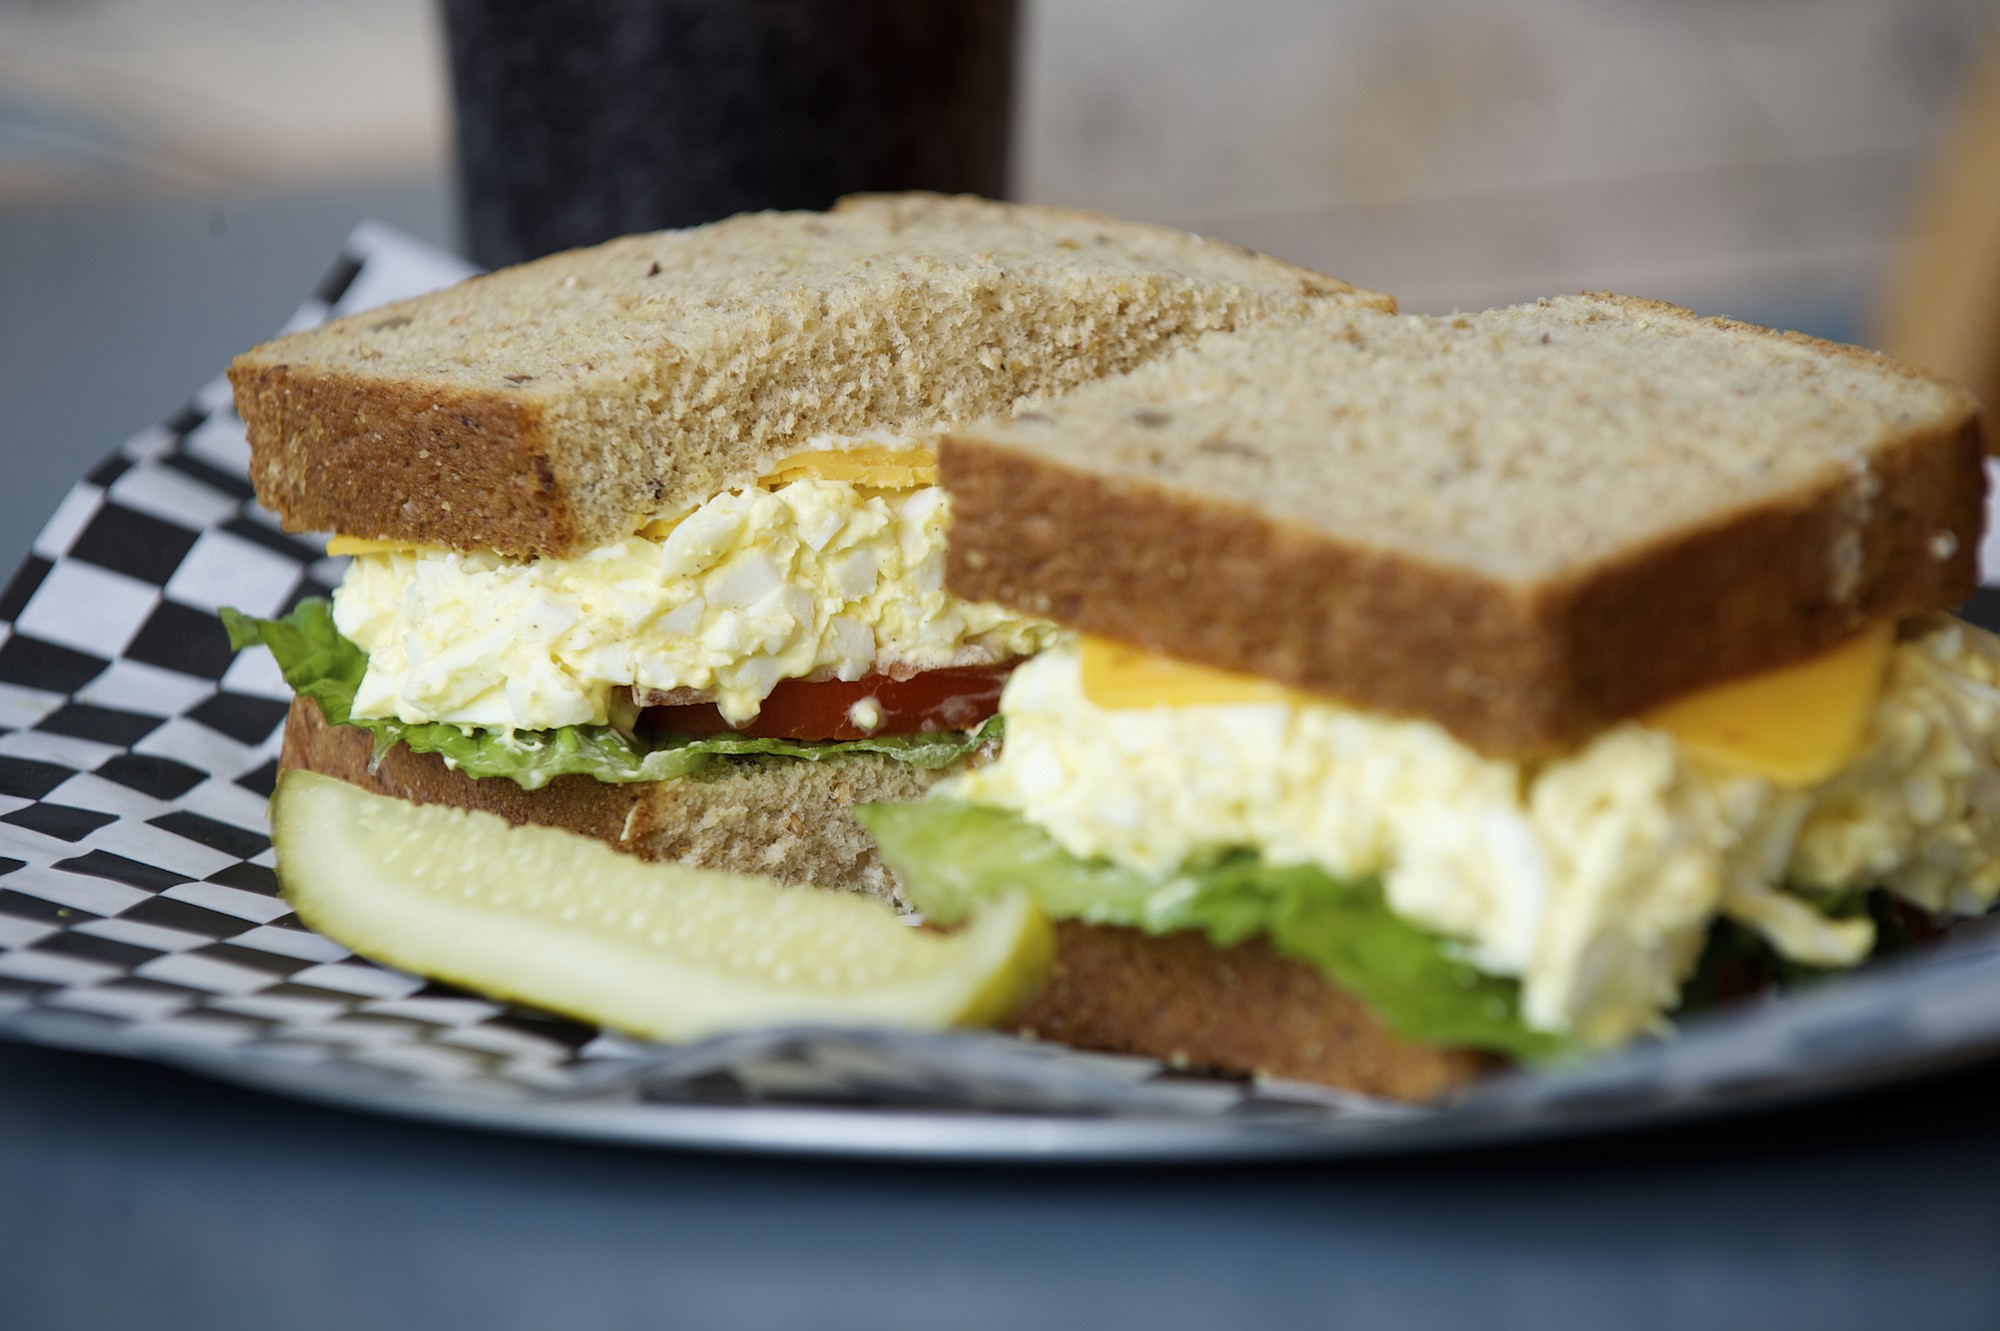 An egg salad and cheddar cheese sandwich is served May 29 at City Sandwich in downtown Vancouver.